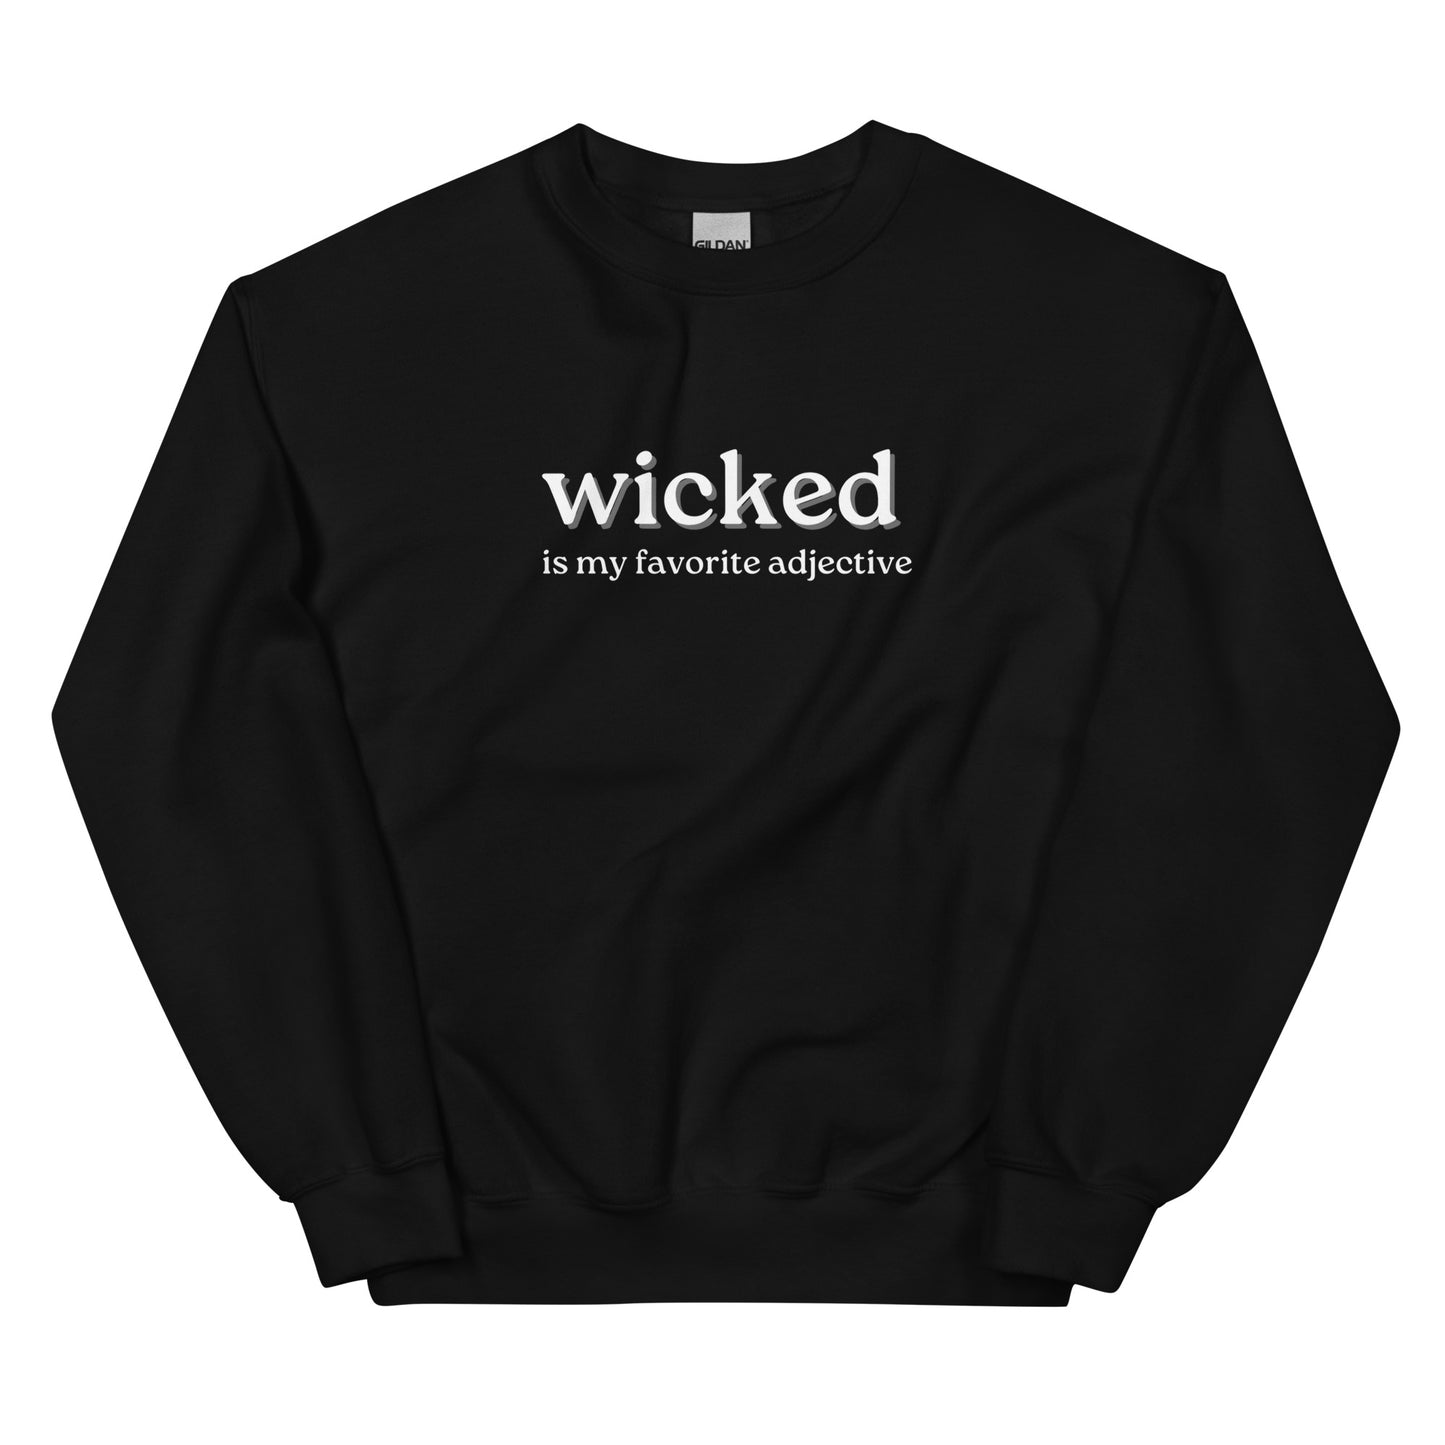 black crewneck that says "wicked is my favorite adjective" in white lettering